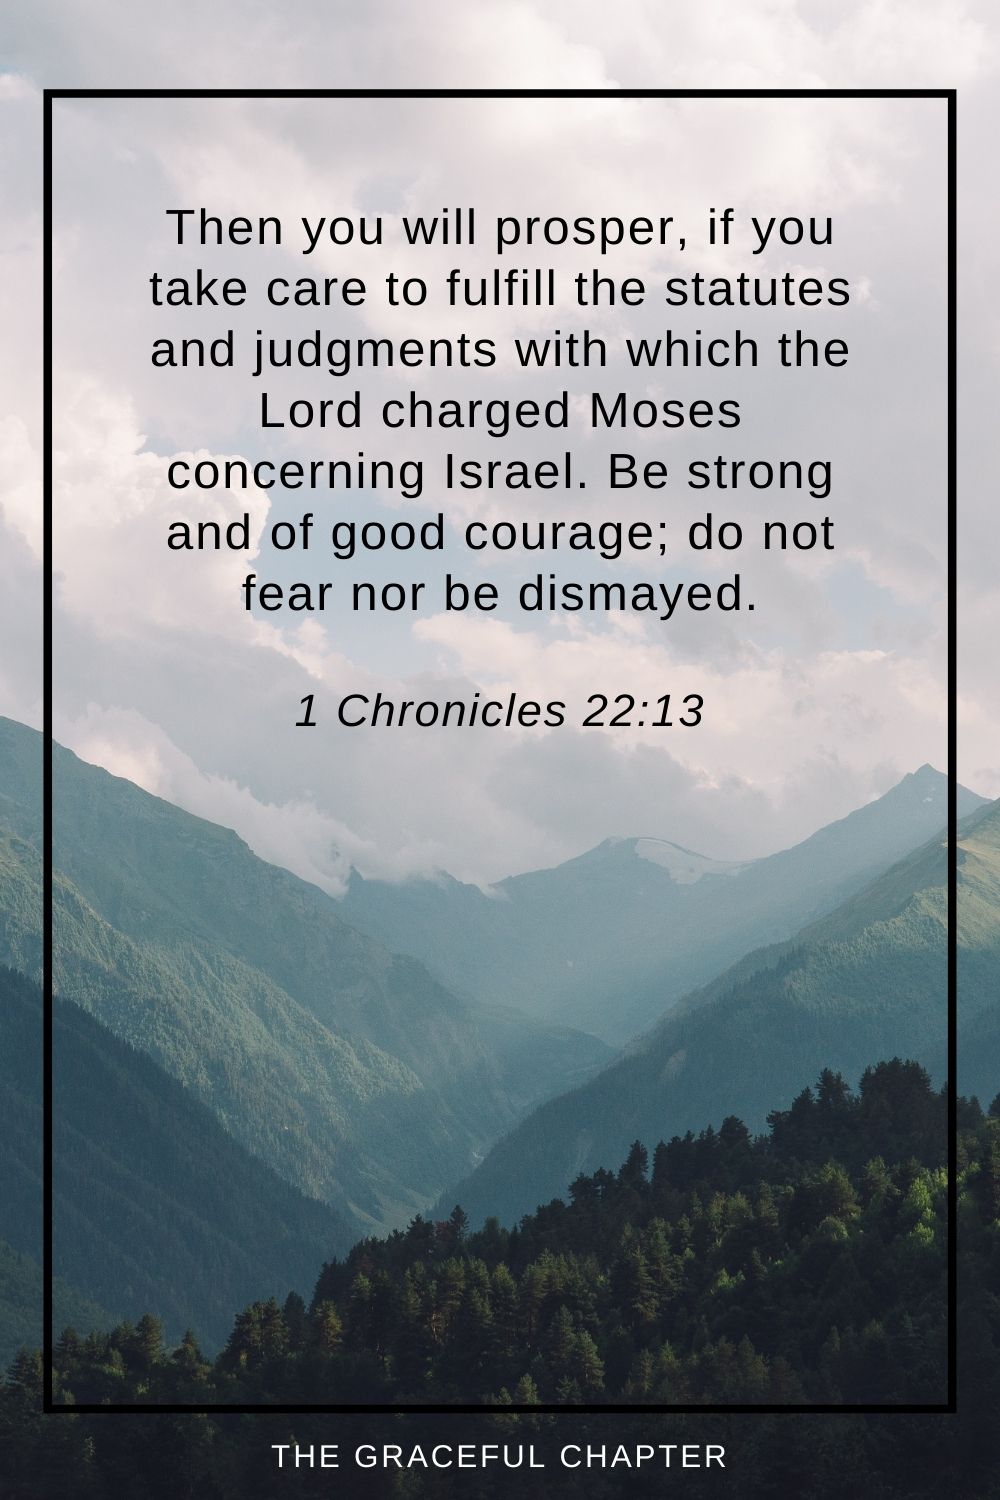 Then you will prosper, if you take care to fulfill the statutes and judgments with which the Lord charged Moses concerning Israel. Be strong and of good courage; do not fear nor be dismayed. 1 Chronicles 22:13